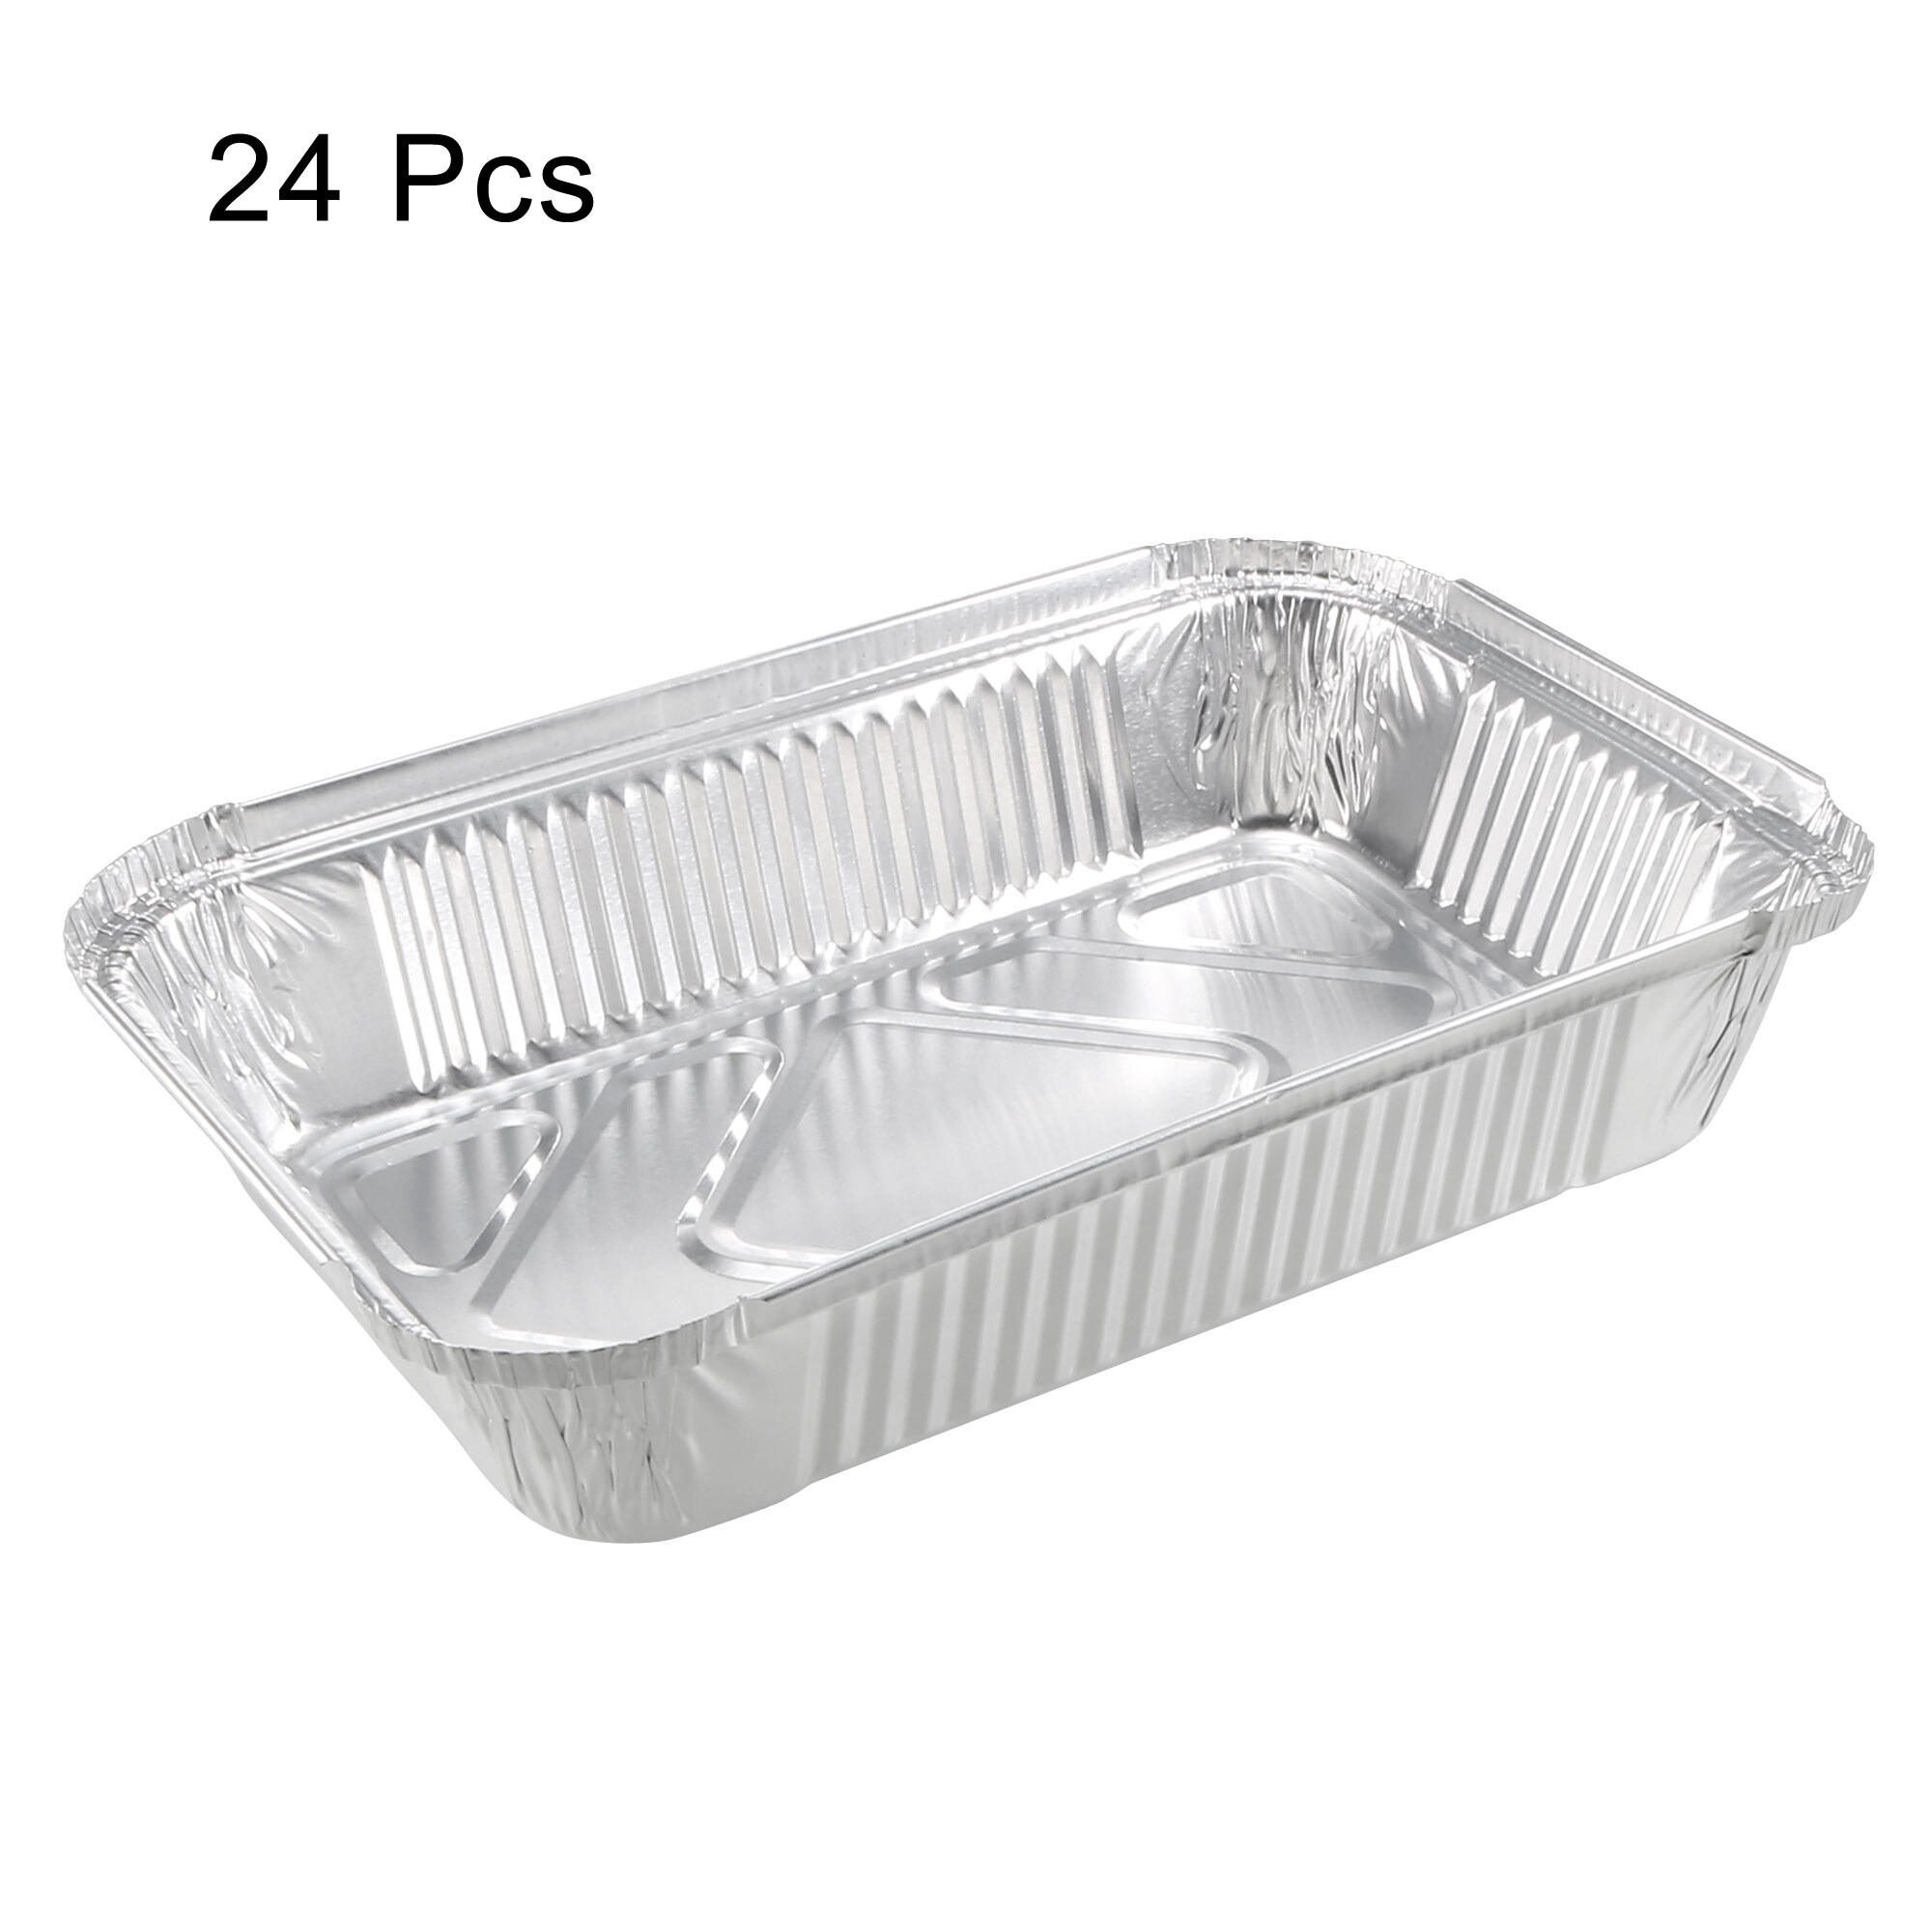 https://ak1.ostkcdn.com/images/products/is/images/direct/68c27b60b1bdac0e827bde2b7dae5795aa9173f3/Aluminum-Foil-Pans%2C-Disposable-Tray-Container-for-Kitchen-Roasting-Bak.jpg